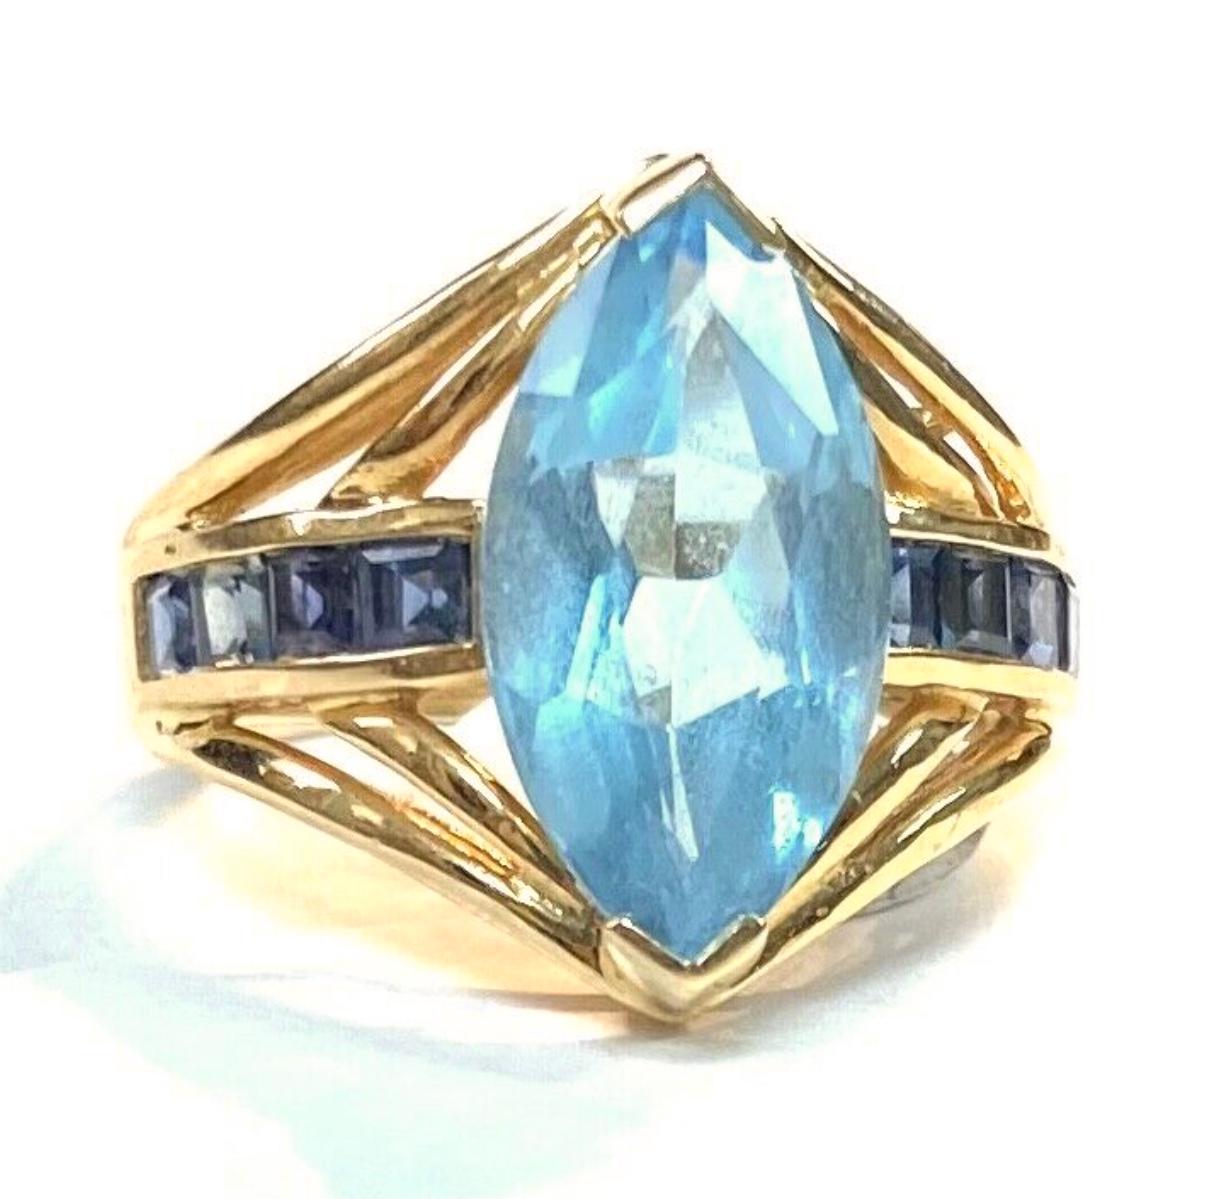 14k yellow gold marquise cut light blue topaz gemstone with dark blue topaz baguettes ,  5.28 Grams TW. The dimensions are approximately 17 mm x 8.5 mm. Approximately 5 carats. Marked14k. Approximate size 6.5.